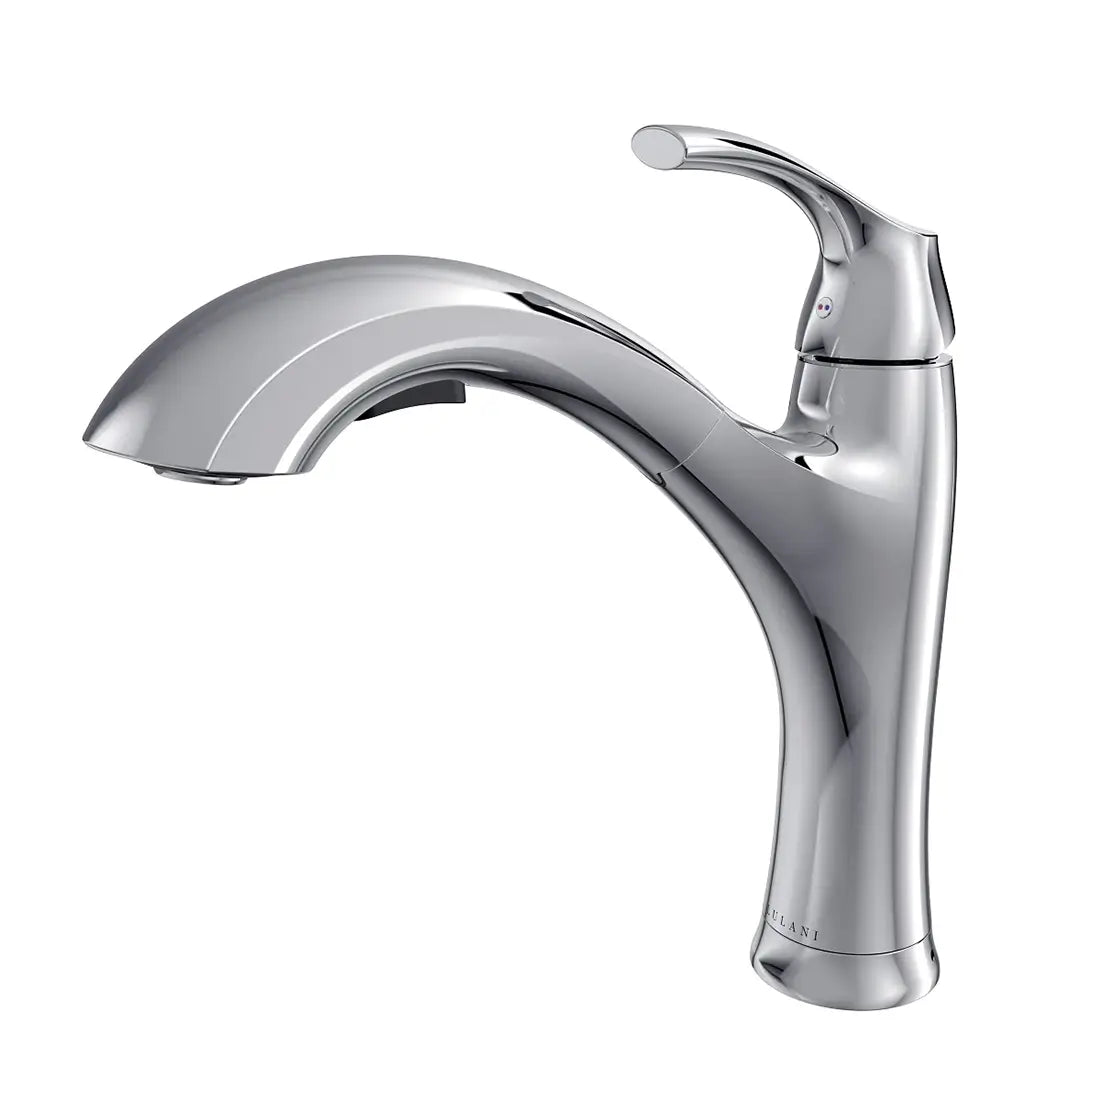 Maldives 1 Handle Pull-Out Swivel Kitchen Faucet